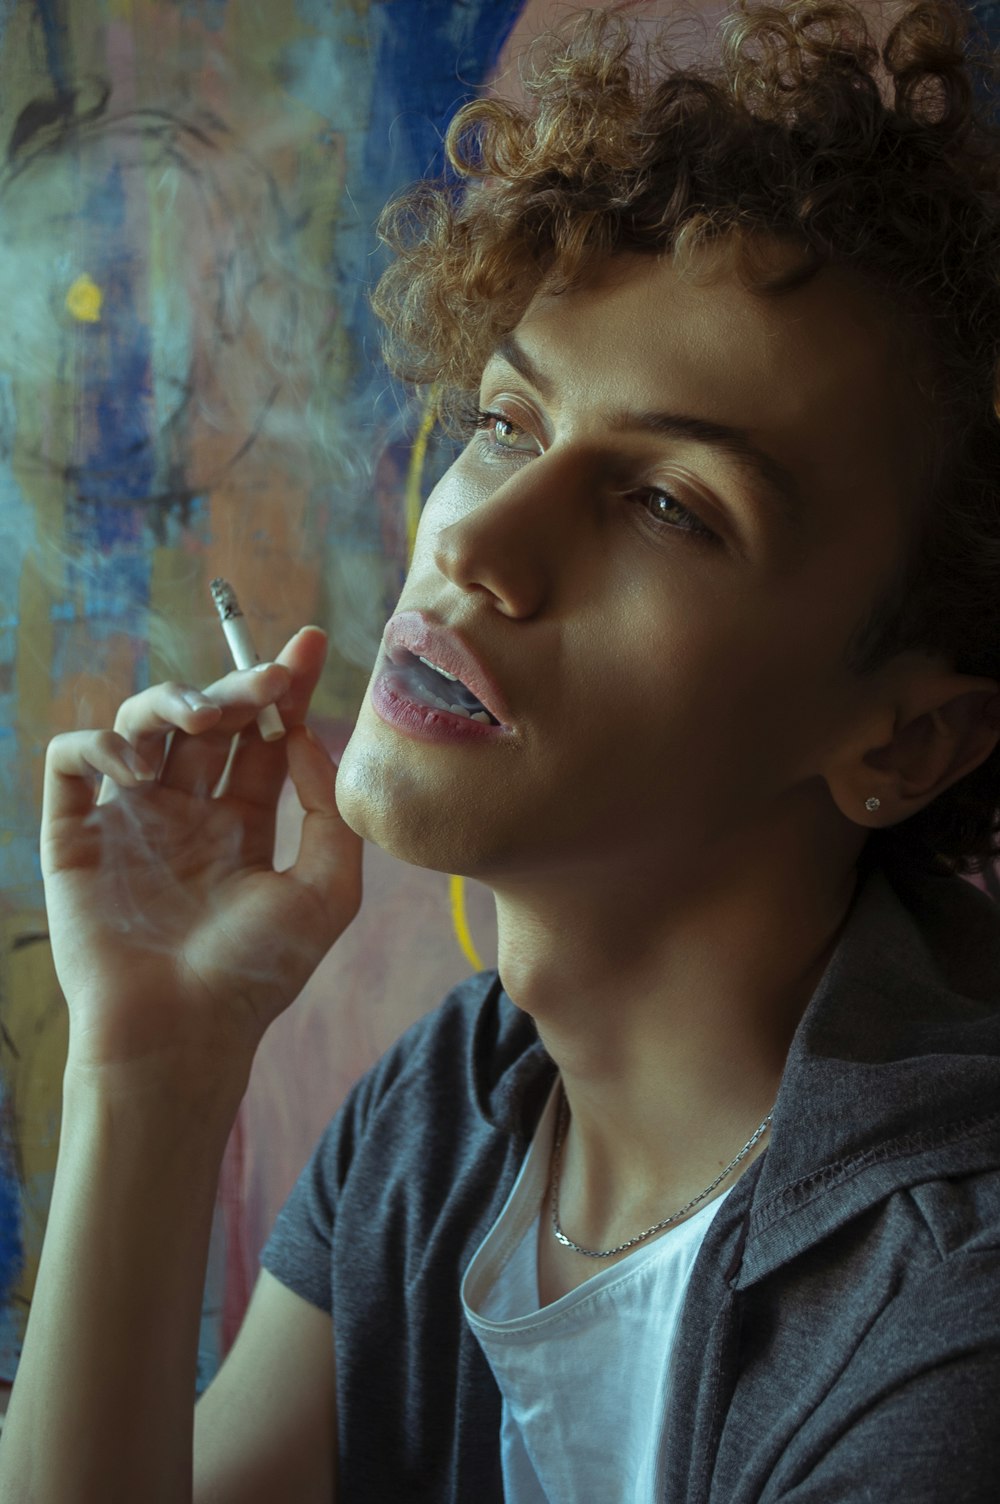 woman in blue crew neck shirt holding cigarette stick